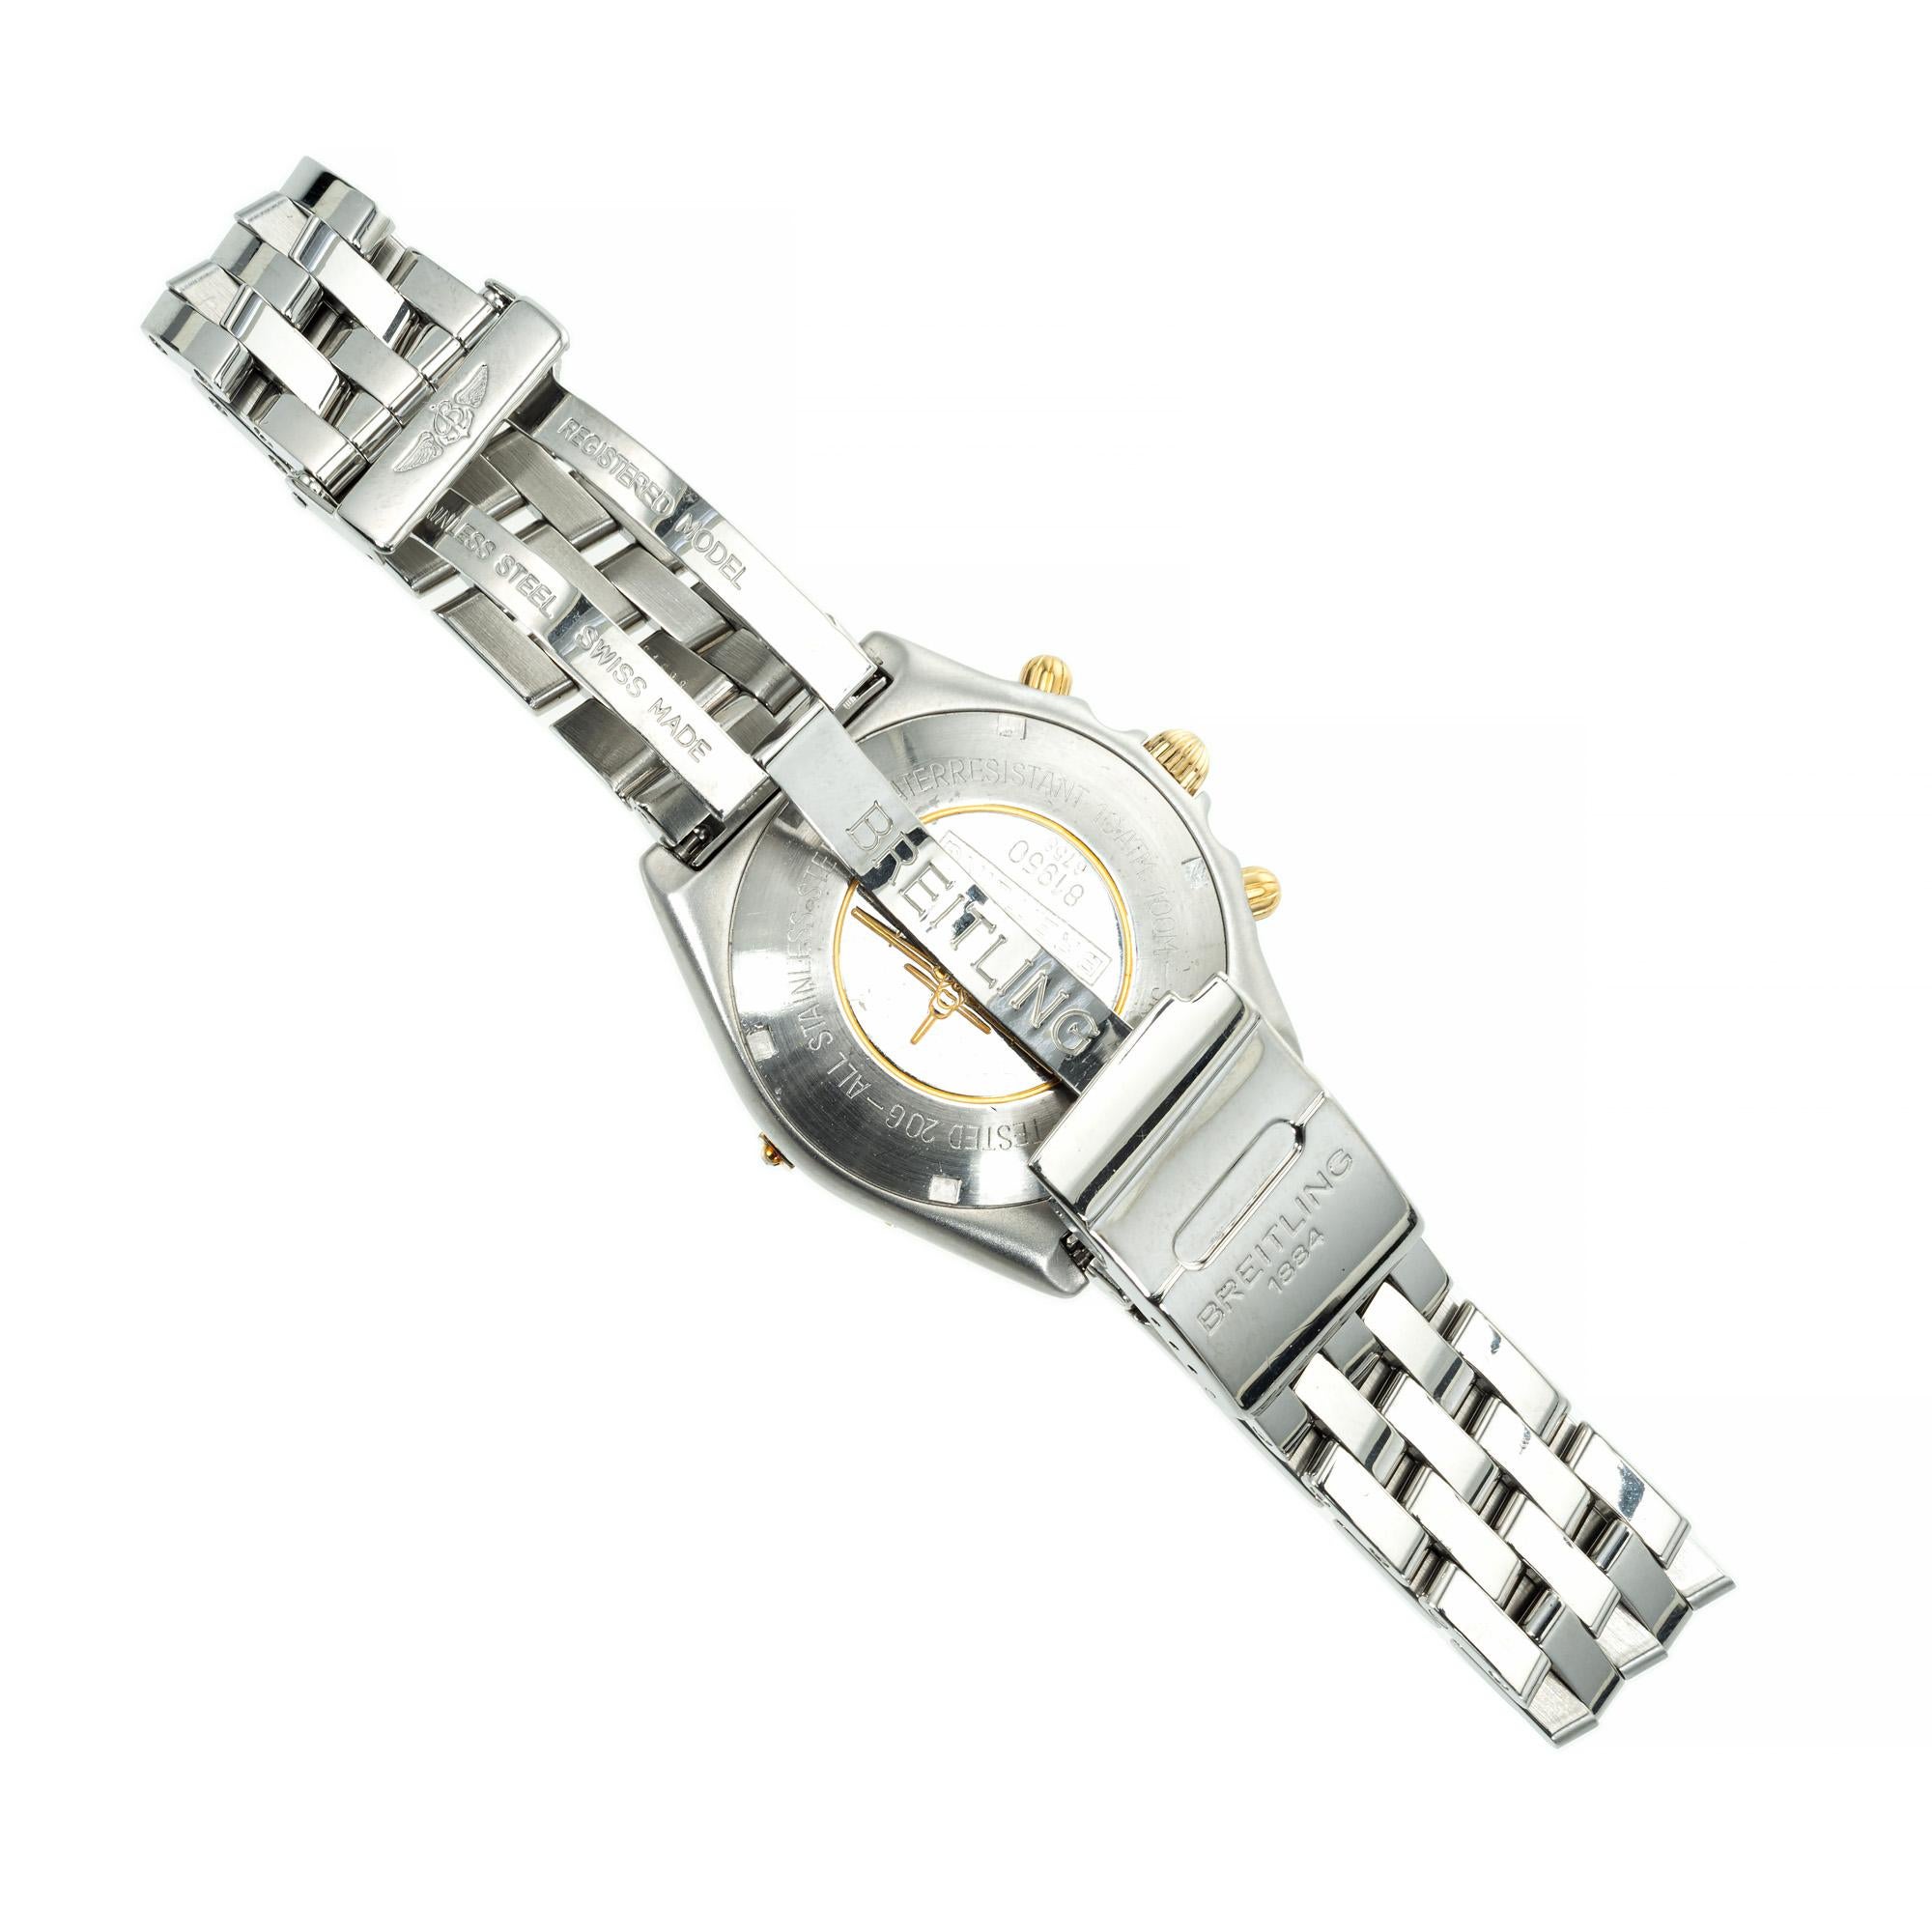 Breitling White Gold Steel Chronograph Wristwatch In Good Condition For Sale In Stamford, CT